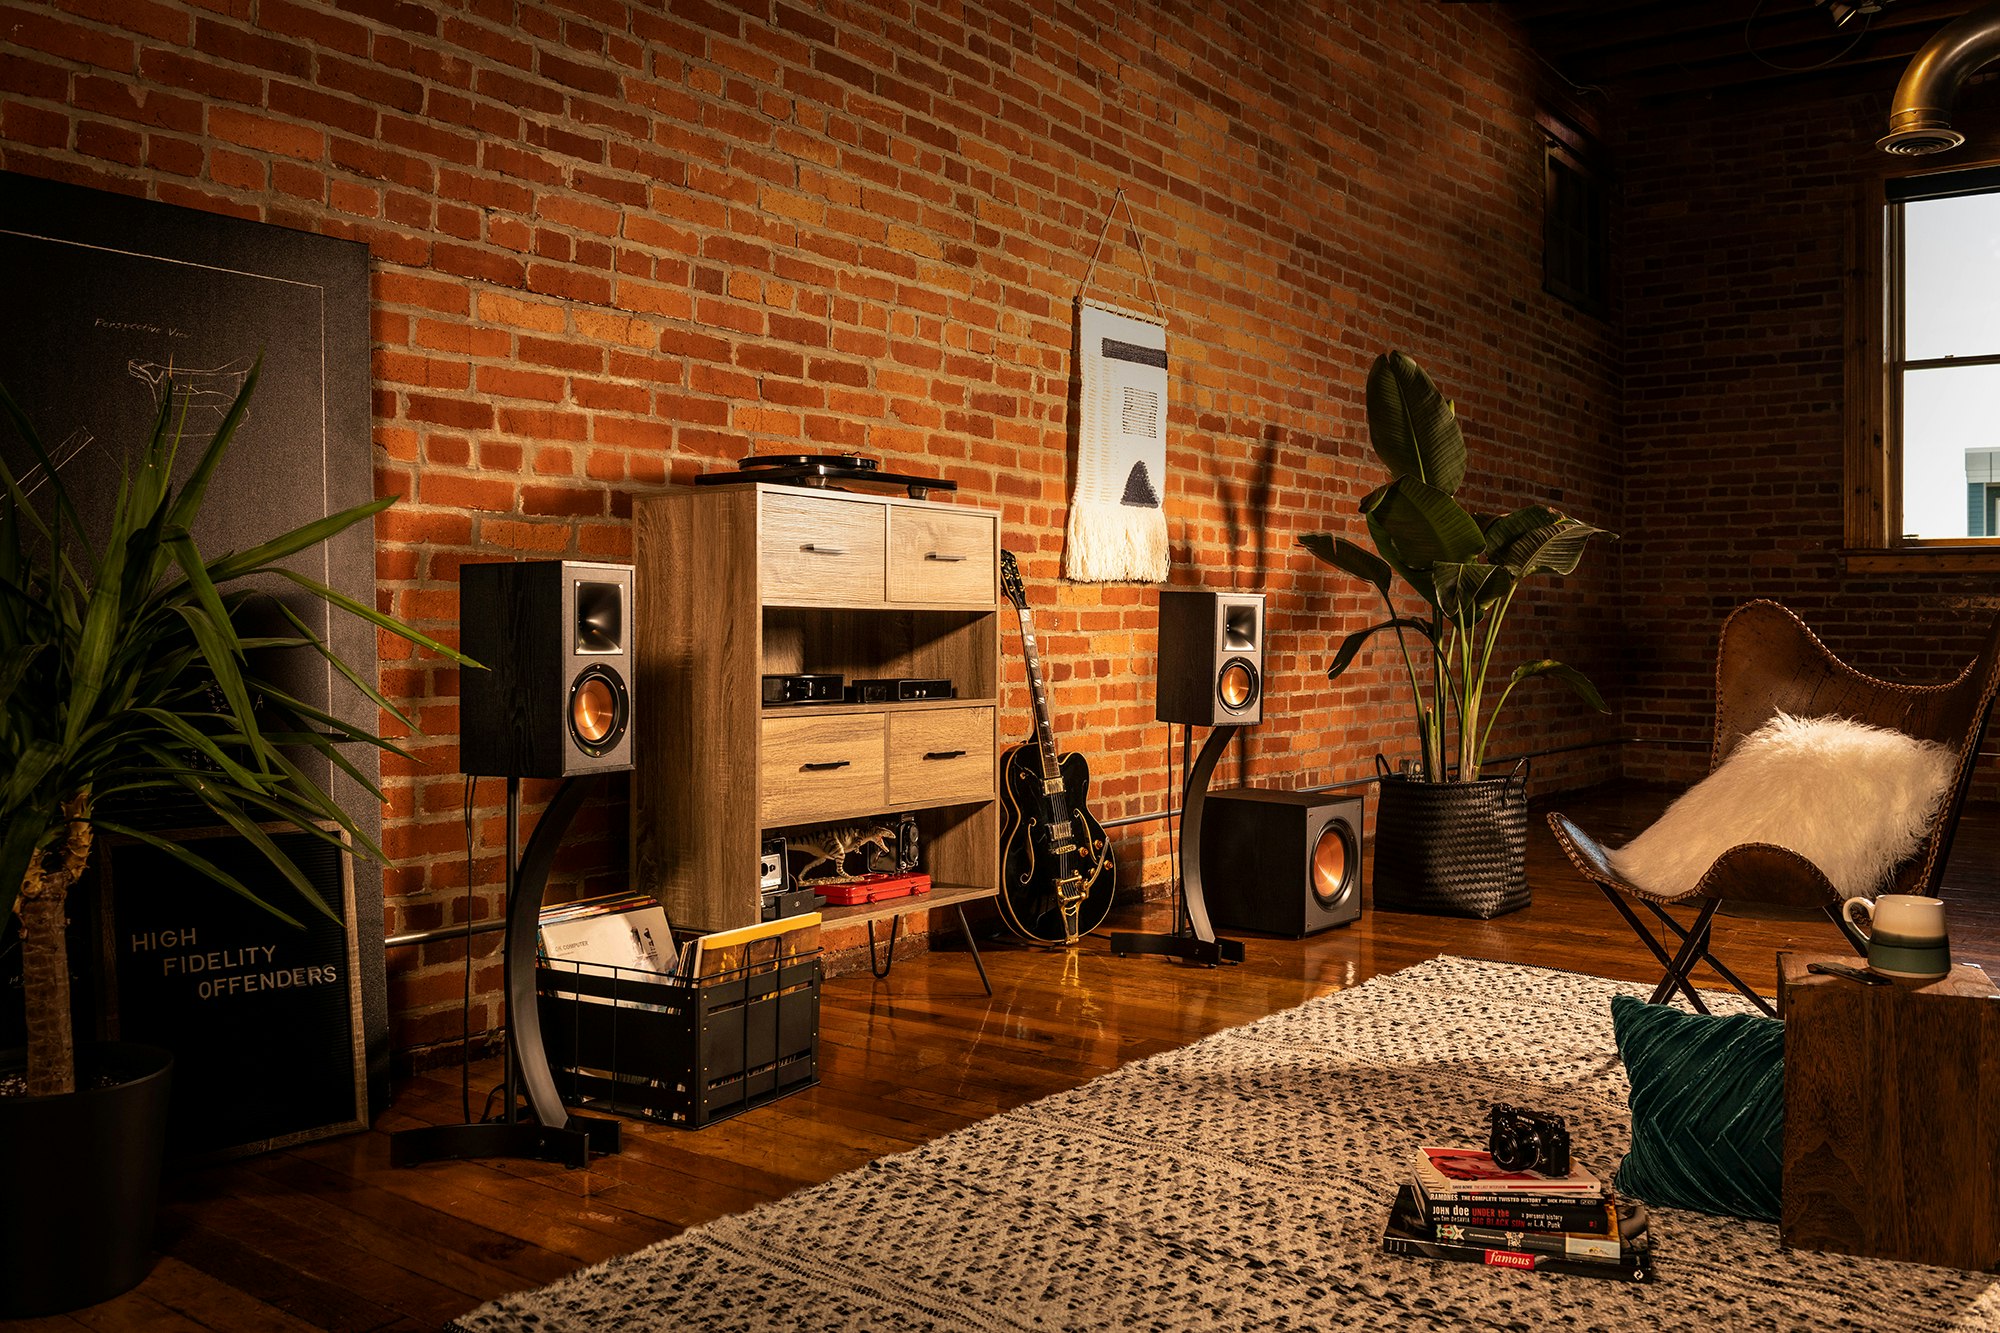 Klipsch Reference bookshelf speakers and subwoofer next to a guitar and wood cabinet